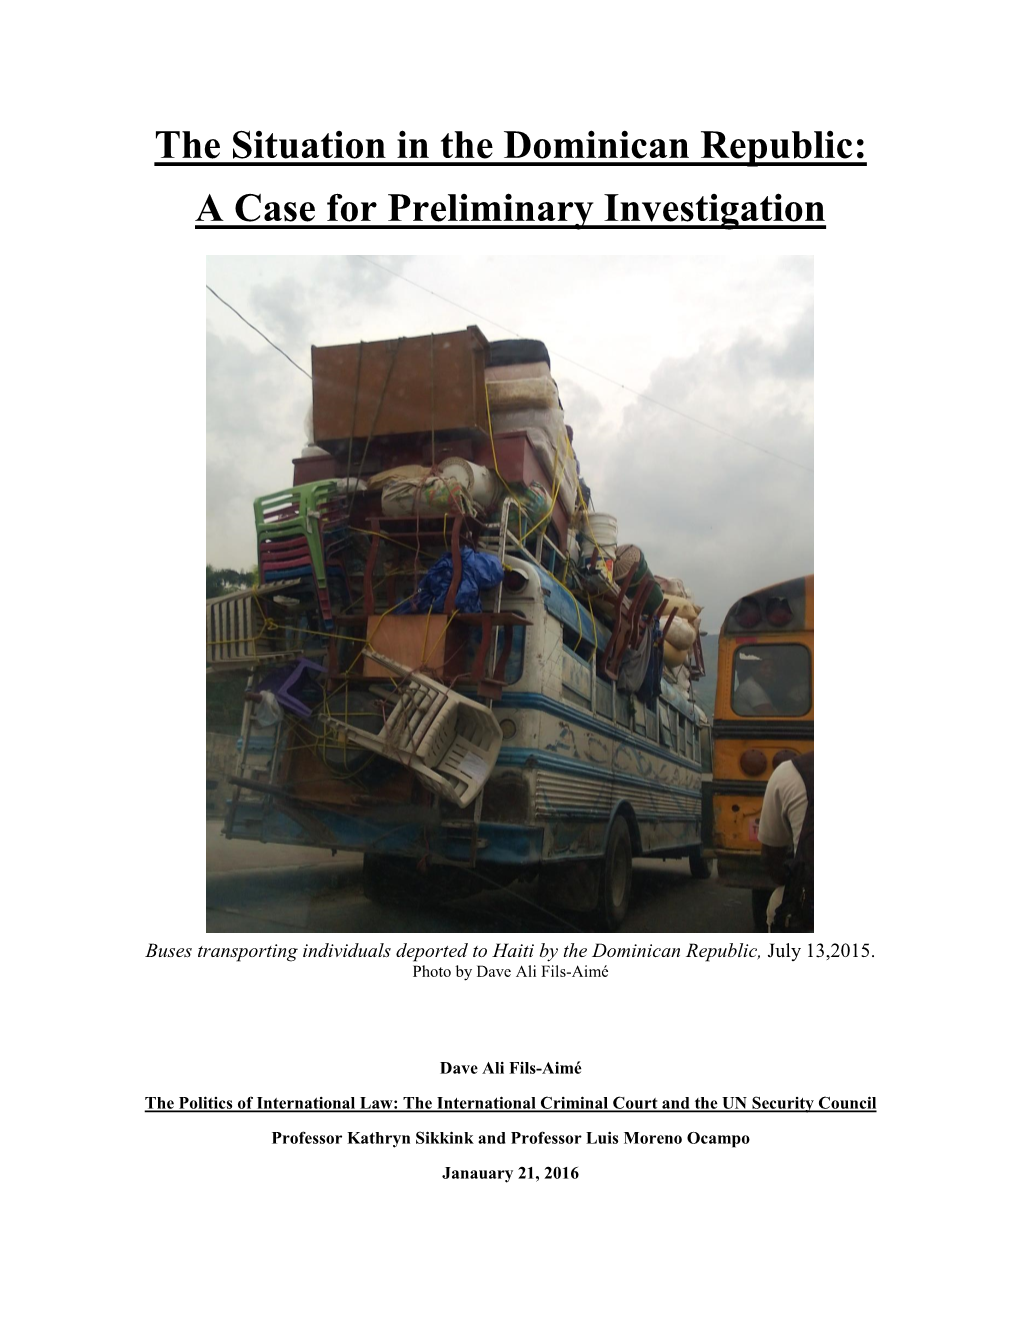 The Situation in the Dominican Republic: a Case for Preliminary Investigation